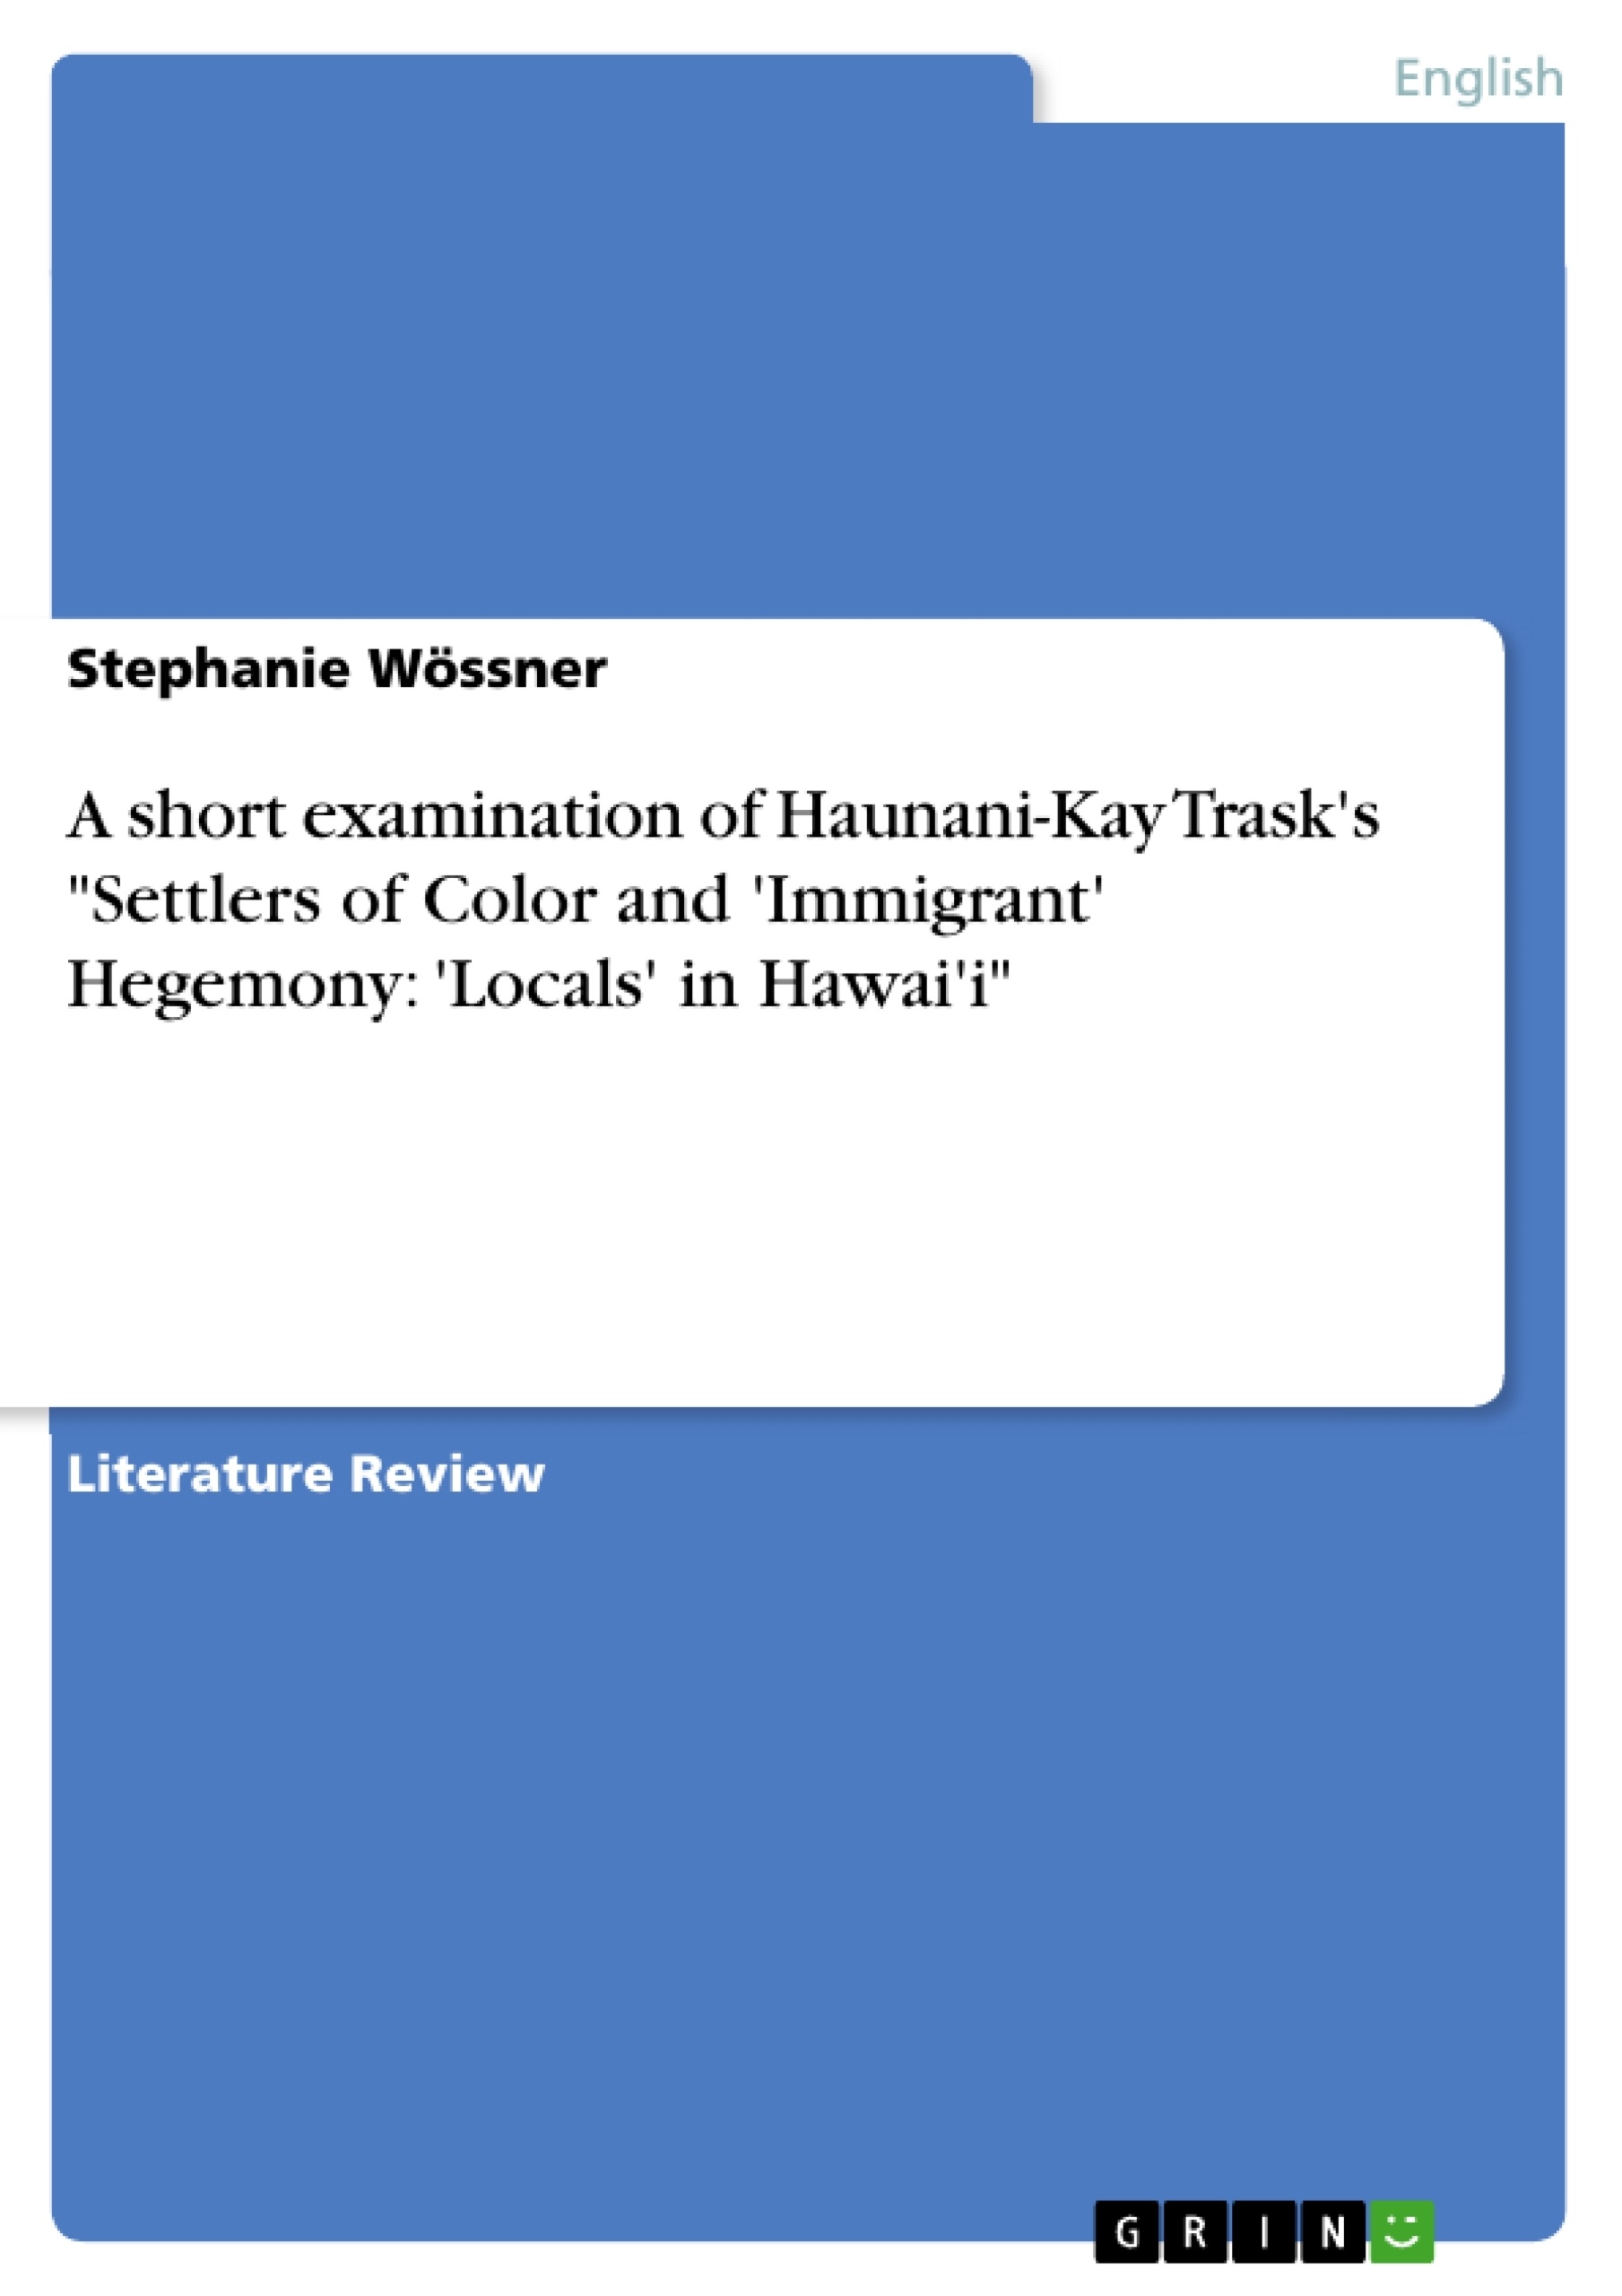 Title: A short examination of Haunani-Kay Trask's "Settlers of Color and 'Immigrant' Hegemony: 'Locals' in Hawai'i"